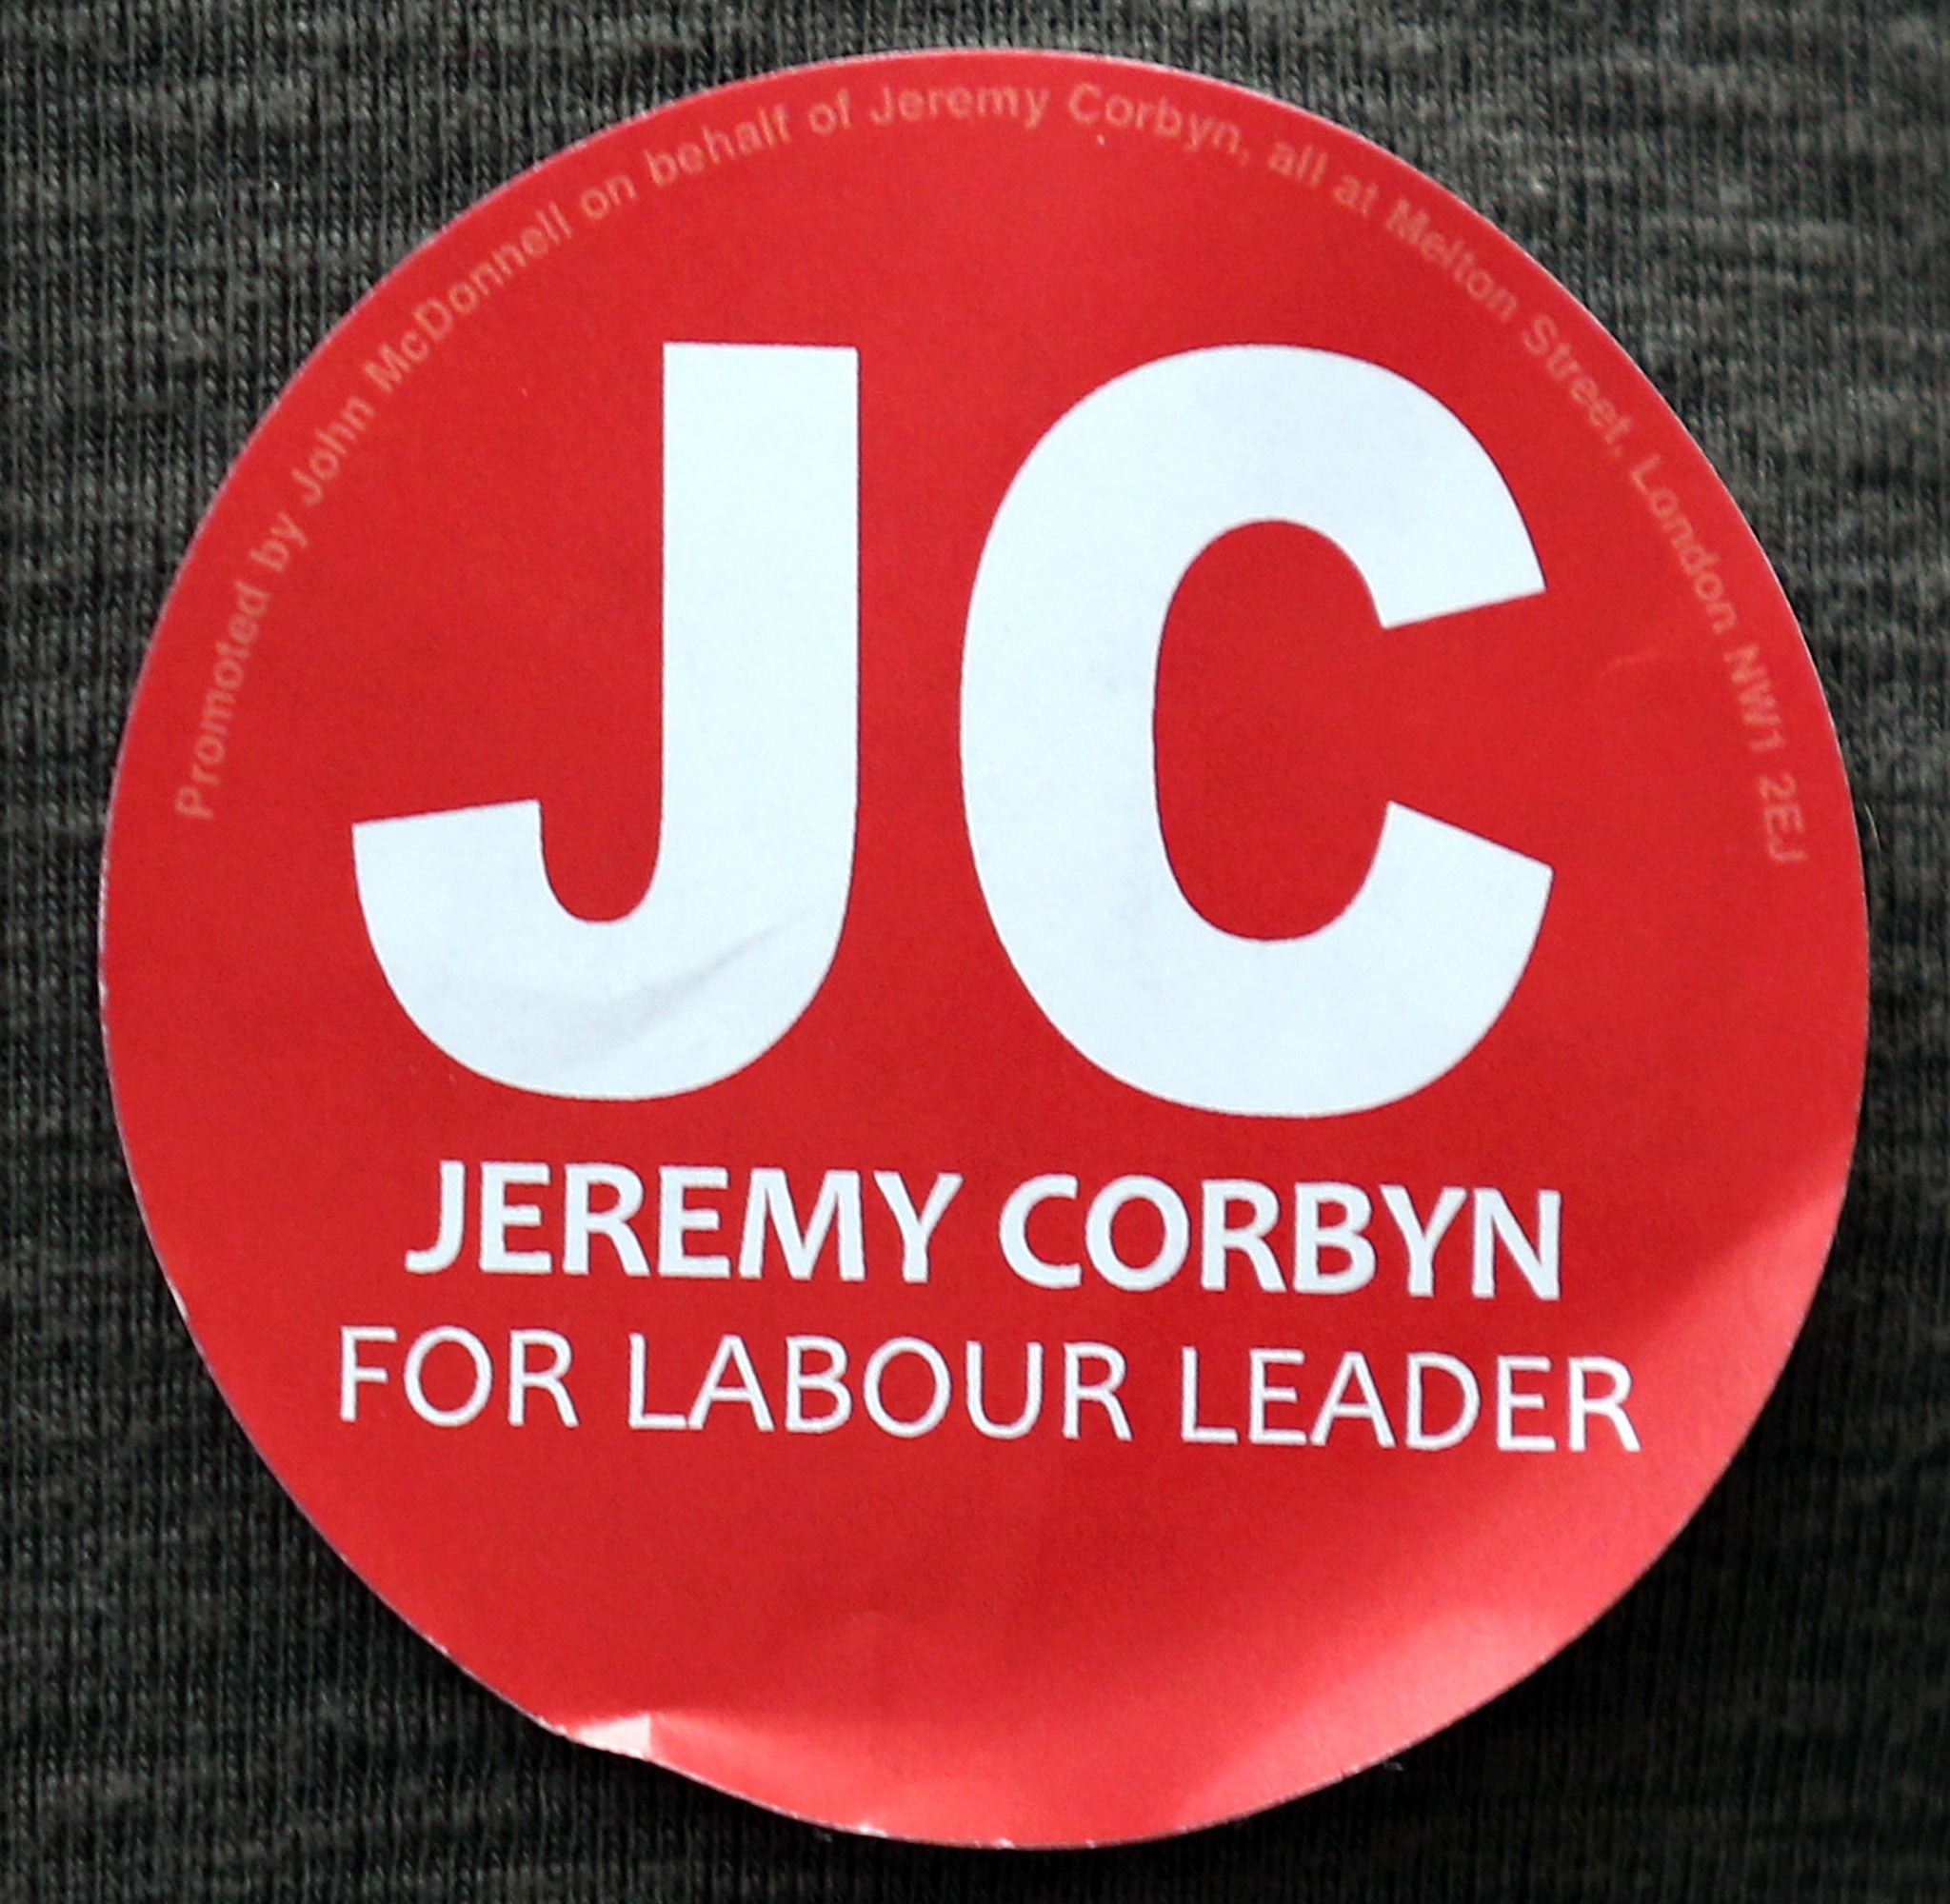 A close-up view of a sticker showing support for Jeremy Corbyn worn by a supporter at a Labour party leadership rally on August 3, 2015 in London